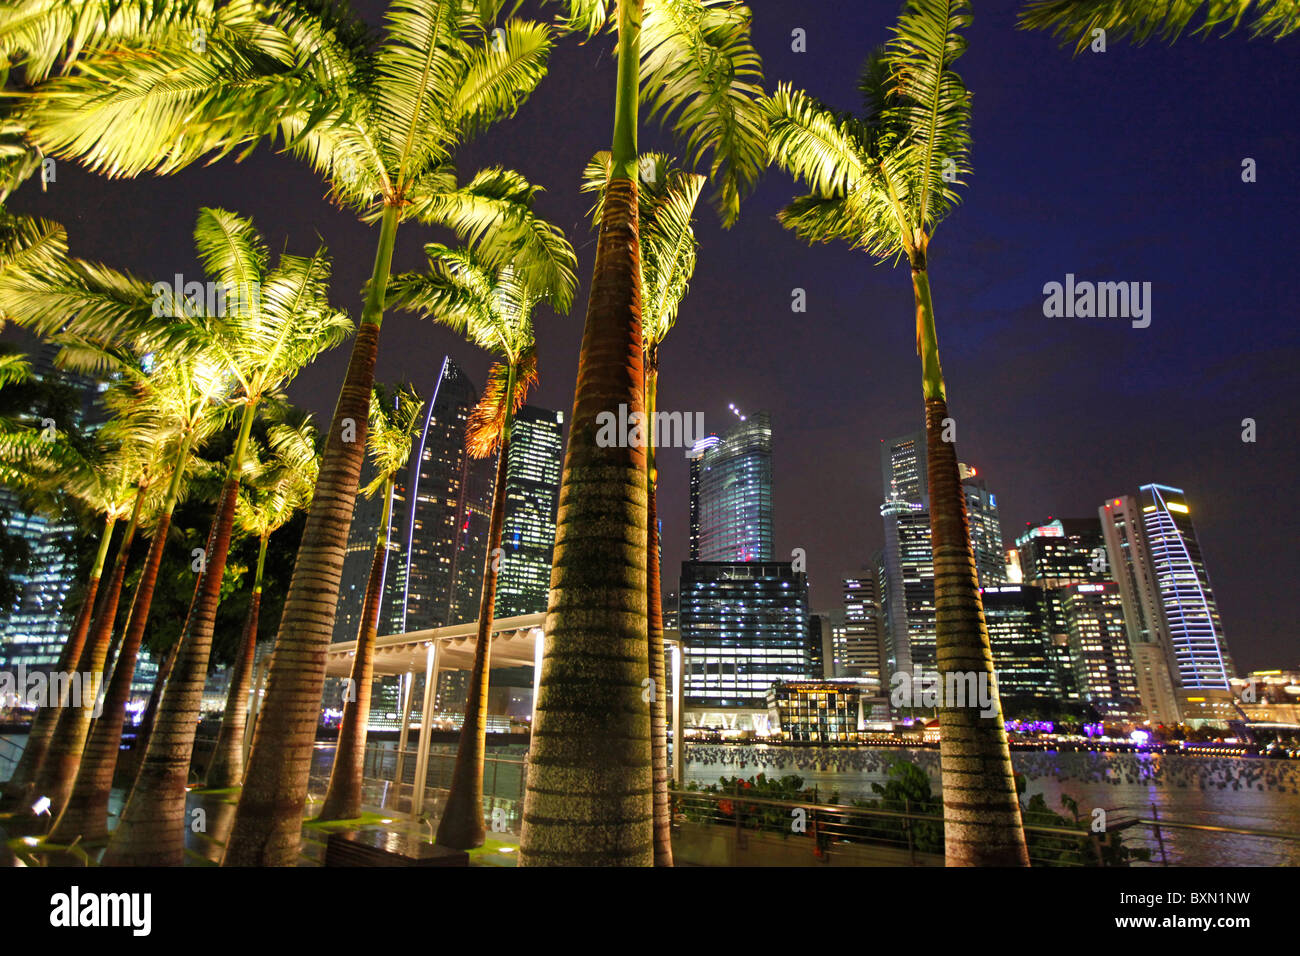 Singapore Marina Bay and skyline of the financial district at night Stock Photo